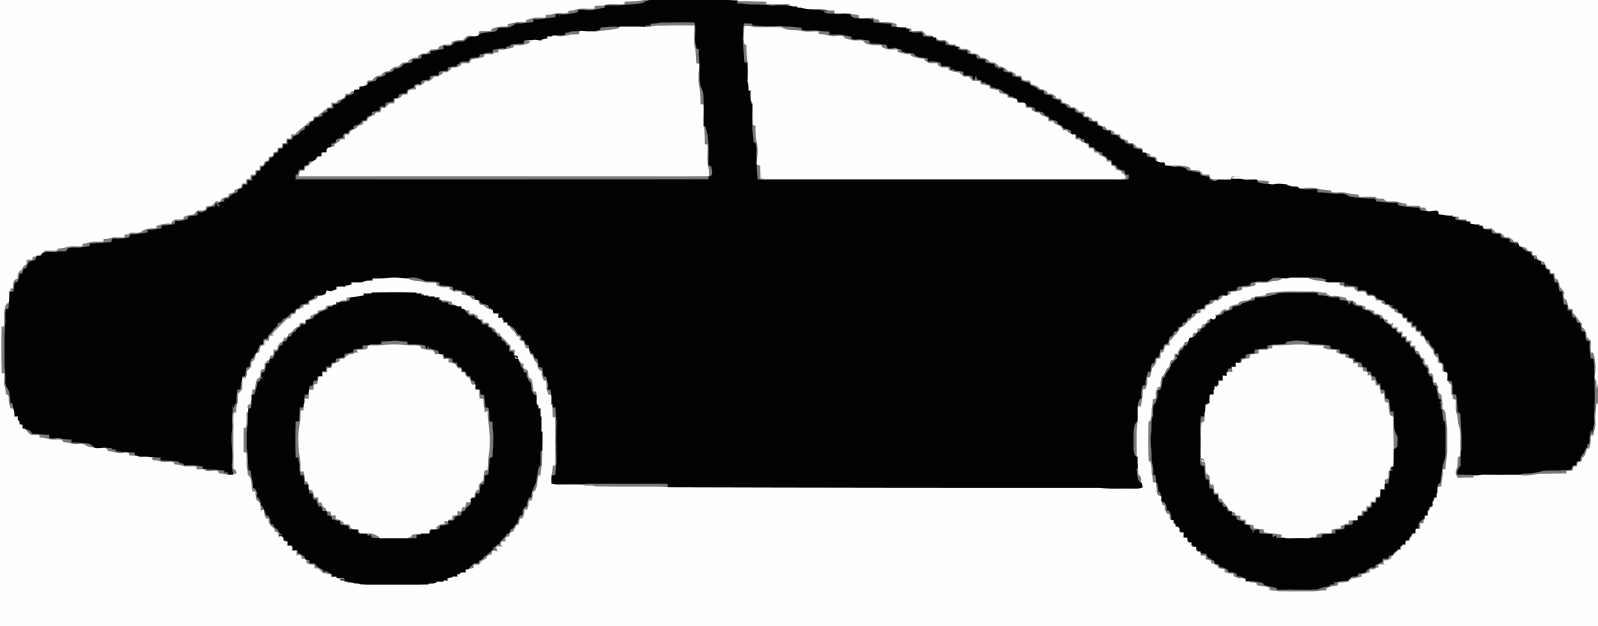 Car Side Clipart Free - ClipArt Best